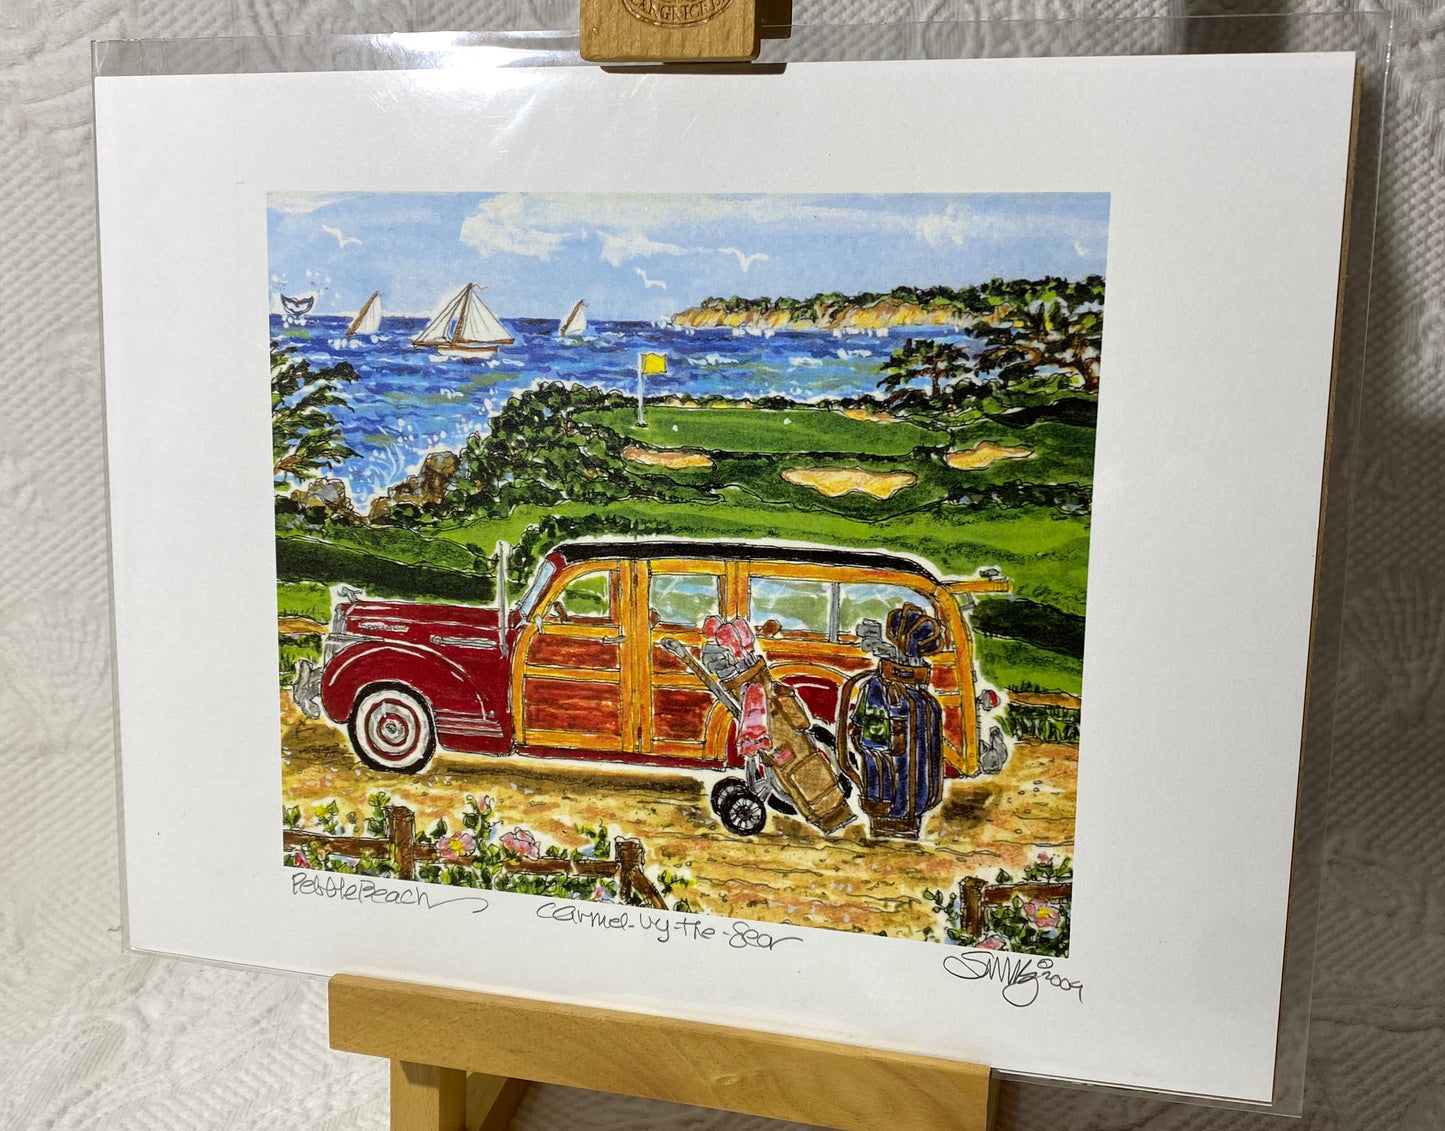 "Pebble Beach Carmel-by-the-Sea" Woodie signed print 2009